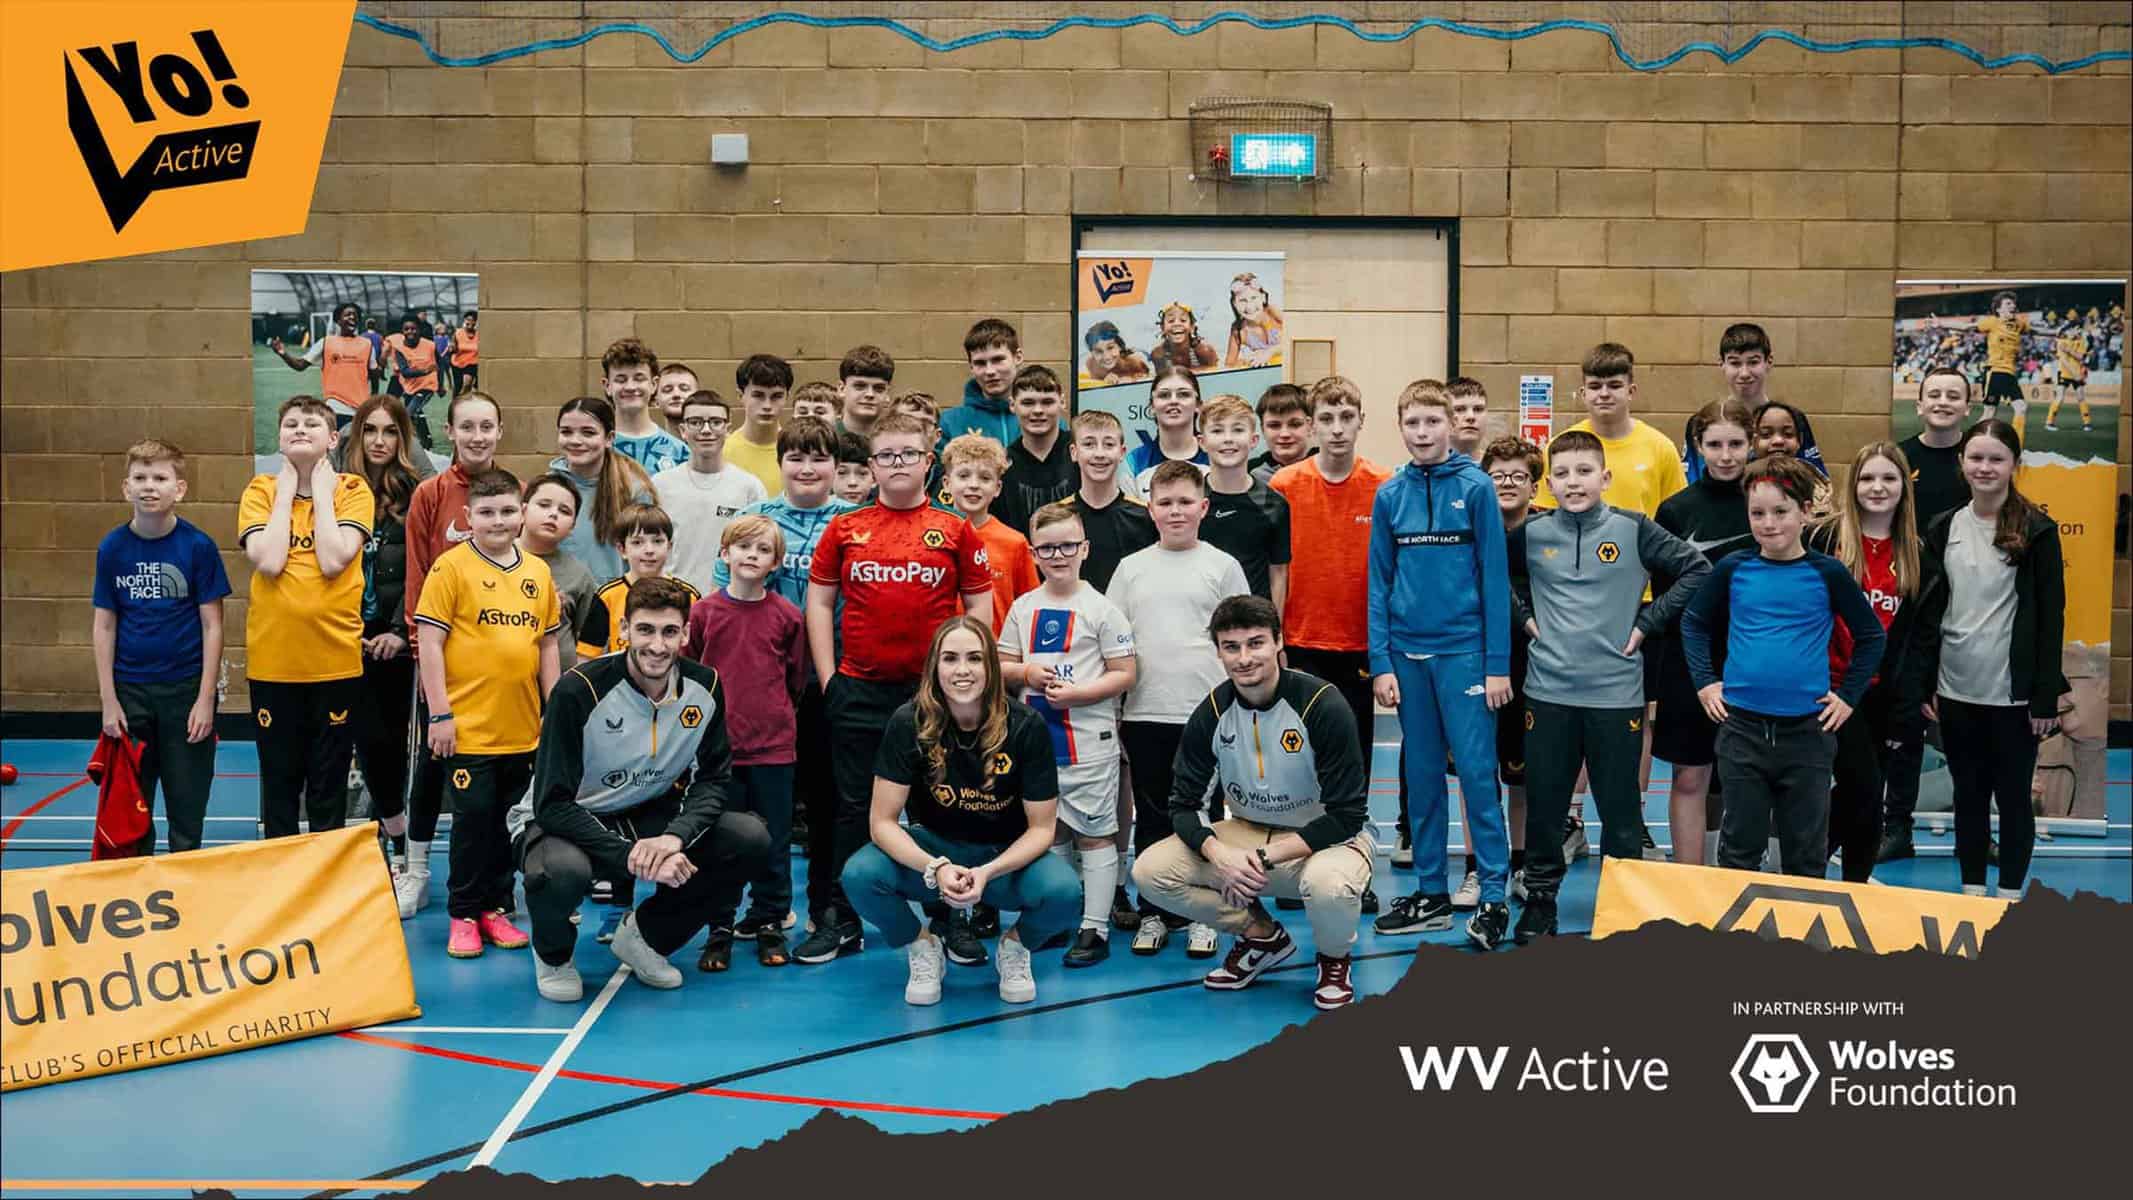 Wolves players get stuck in at Yo! Active Image